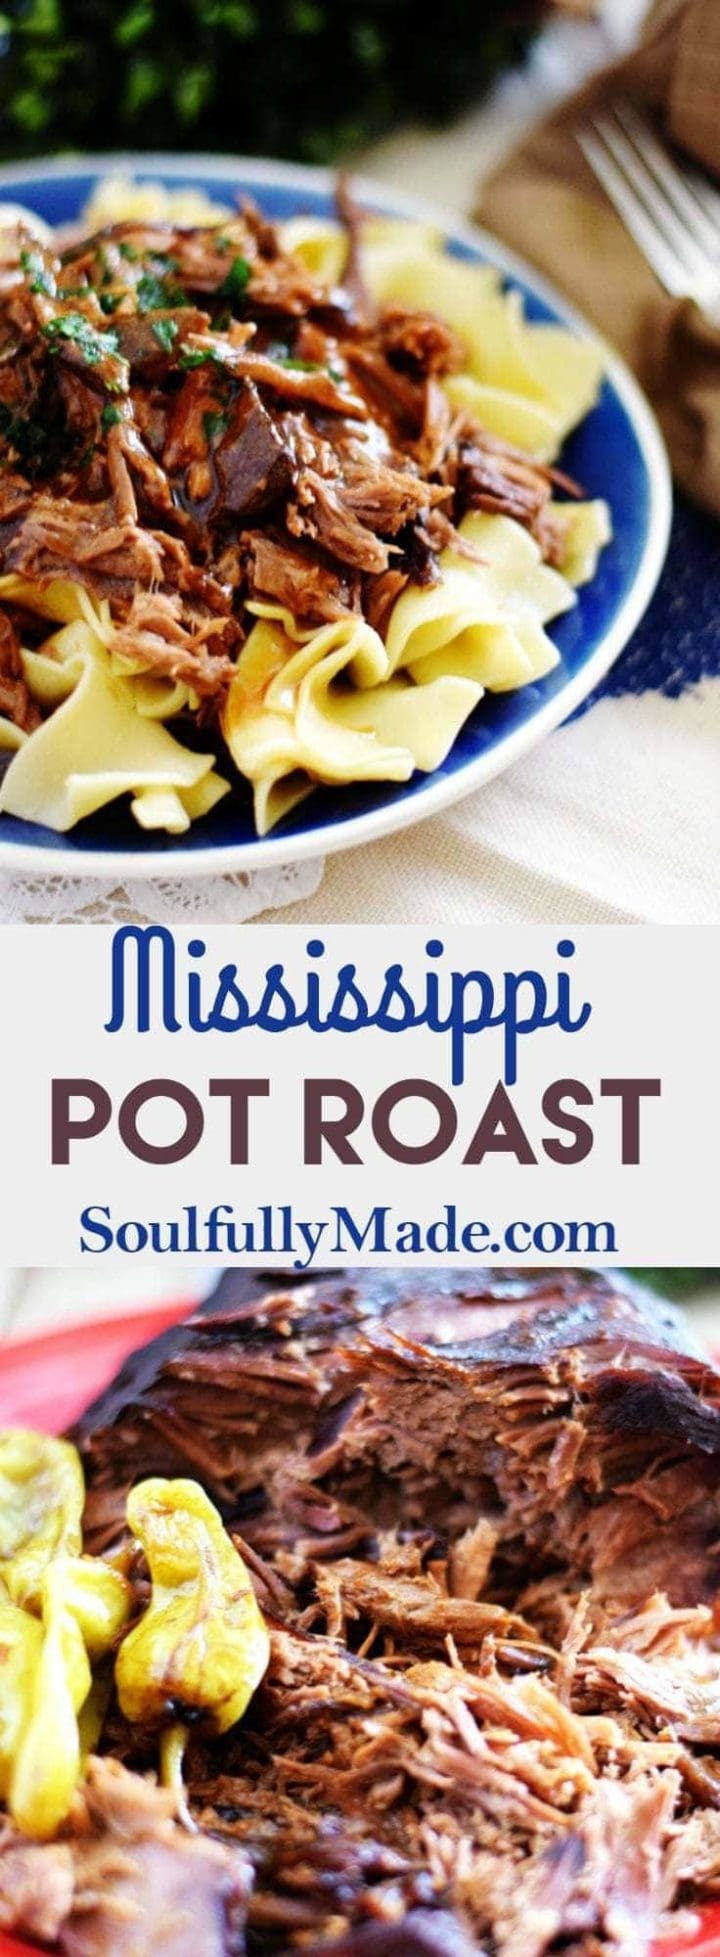 Slow Cooker Mississippi Pot Roast - Soulfully Made